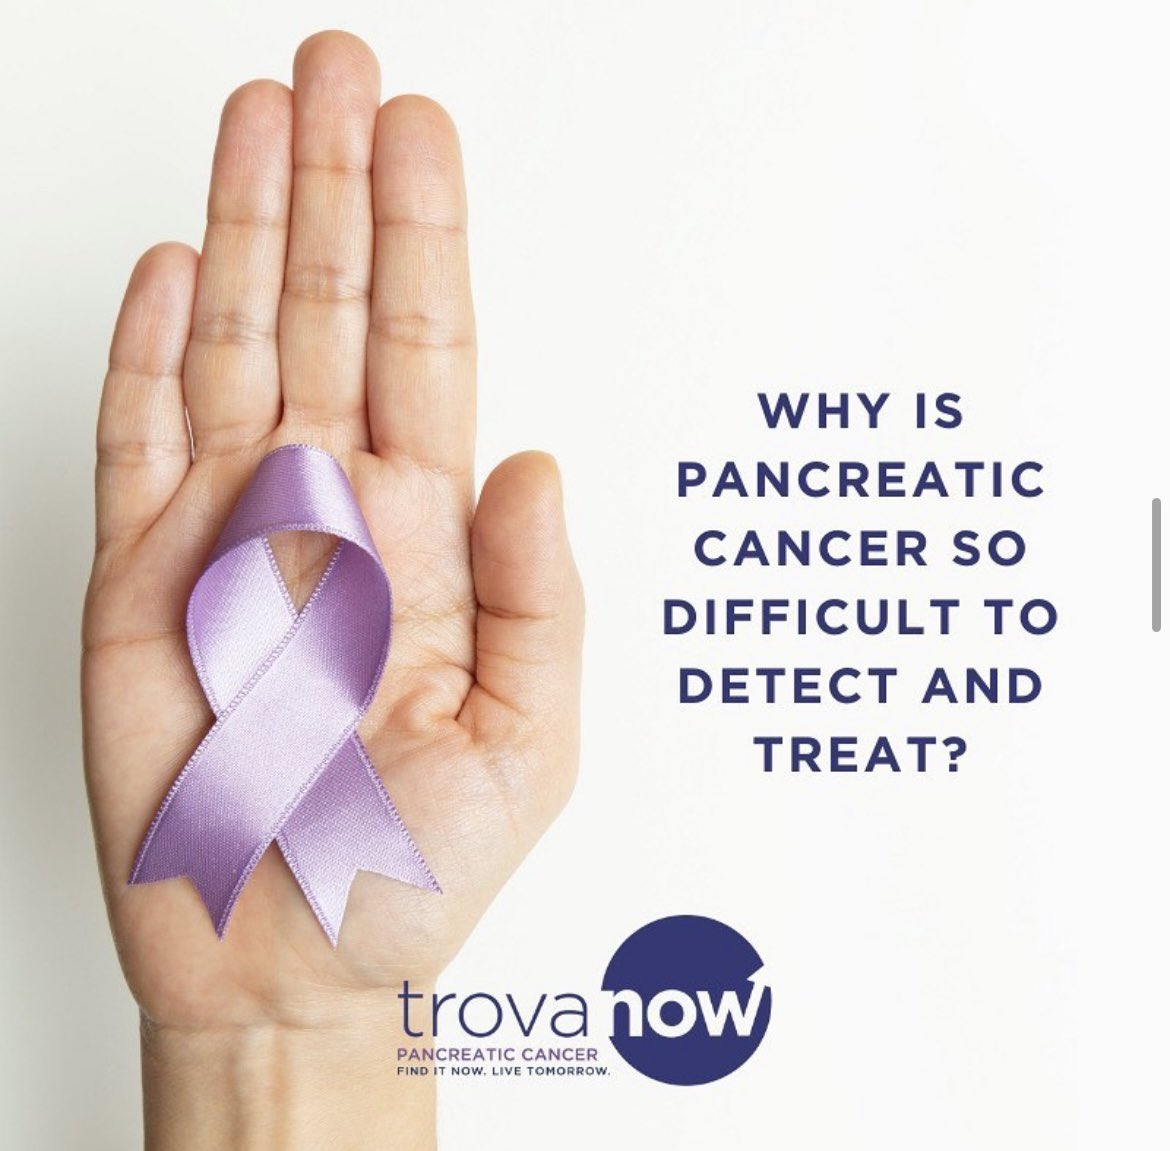 There is no standard screening to diagnose pancreatic cancer.  

💜 At TrovaNOW, our mission is to raise funding for collaborative research for early detection and prevention.  

🧬 Learn more at trovanow.com #trovanow